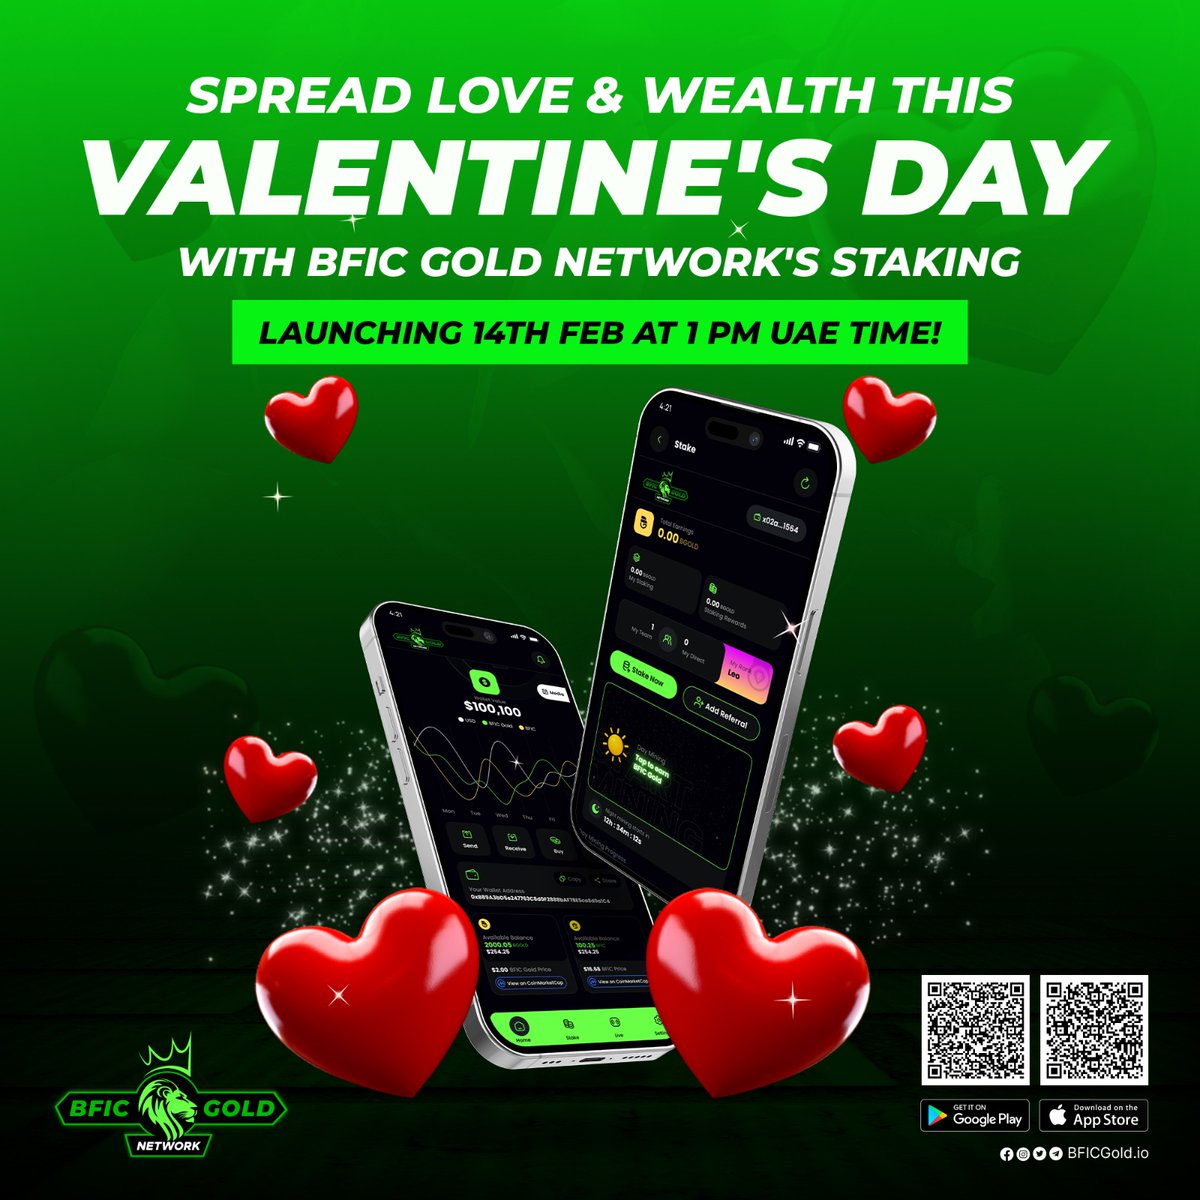 Exciting News Alert! 🎉 Get ready to celebrate Valentine's Day in style with the launch of BFIC Gold Staking! Mark your calendars for Feb 14th at 1 PM UAE Time as we unveil this revolutionary opportunity to multiply your wealth.